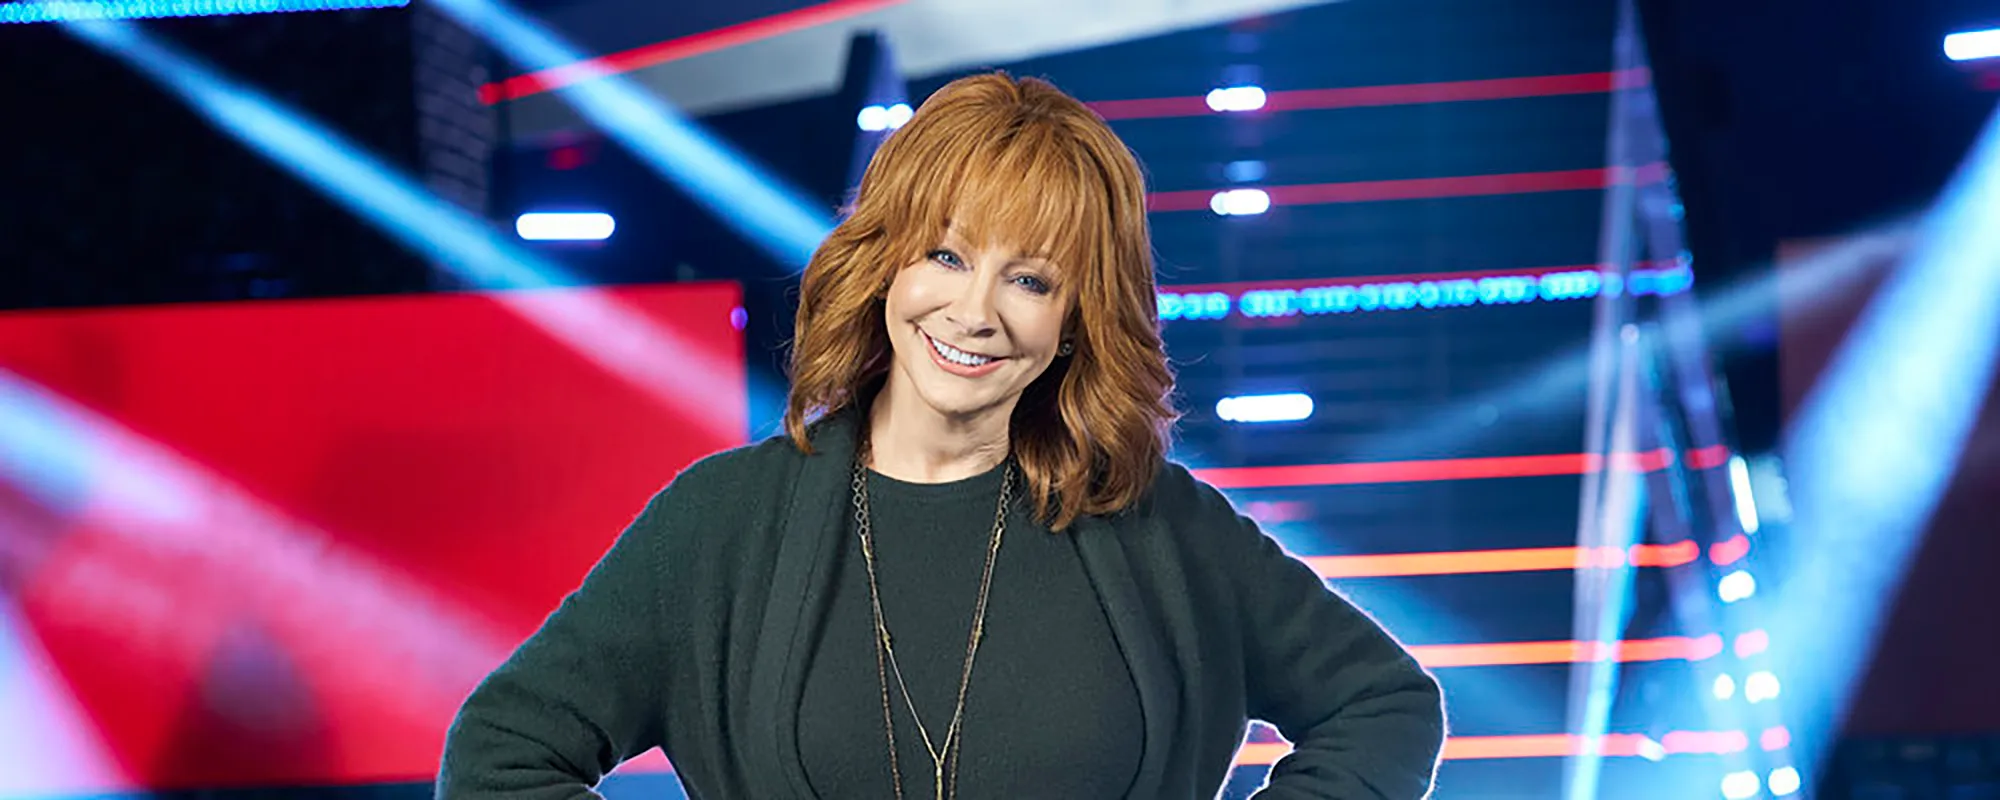 Reba McEntire Teases Appearance on ‘The Voice,’ Coaches Share Praise—”Absolute Queen”